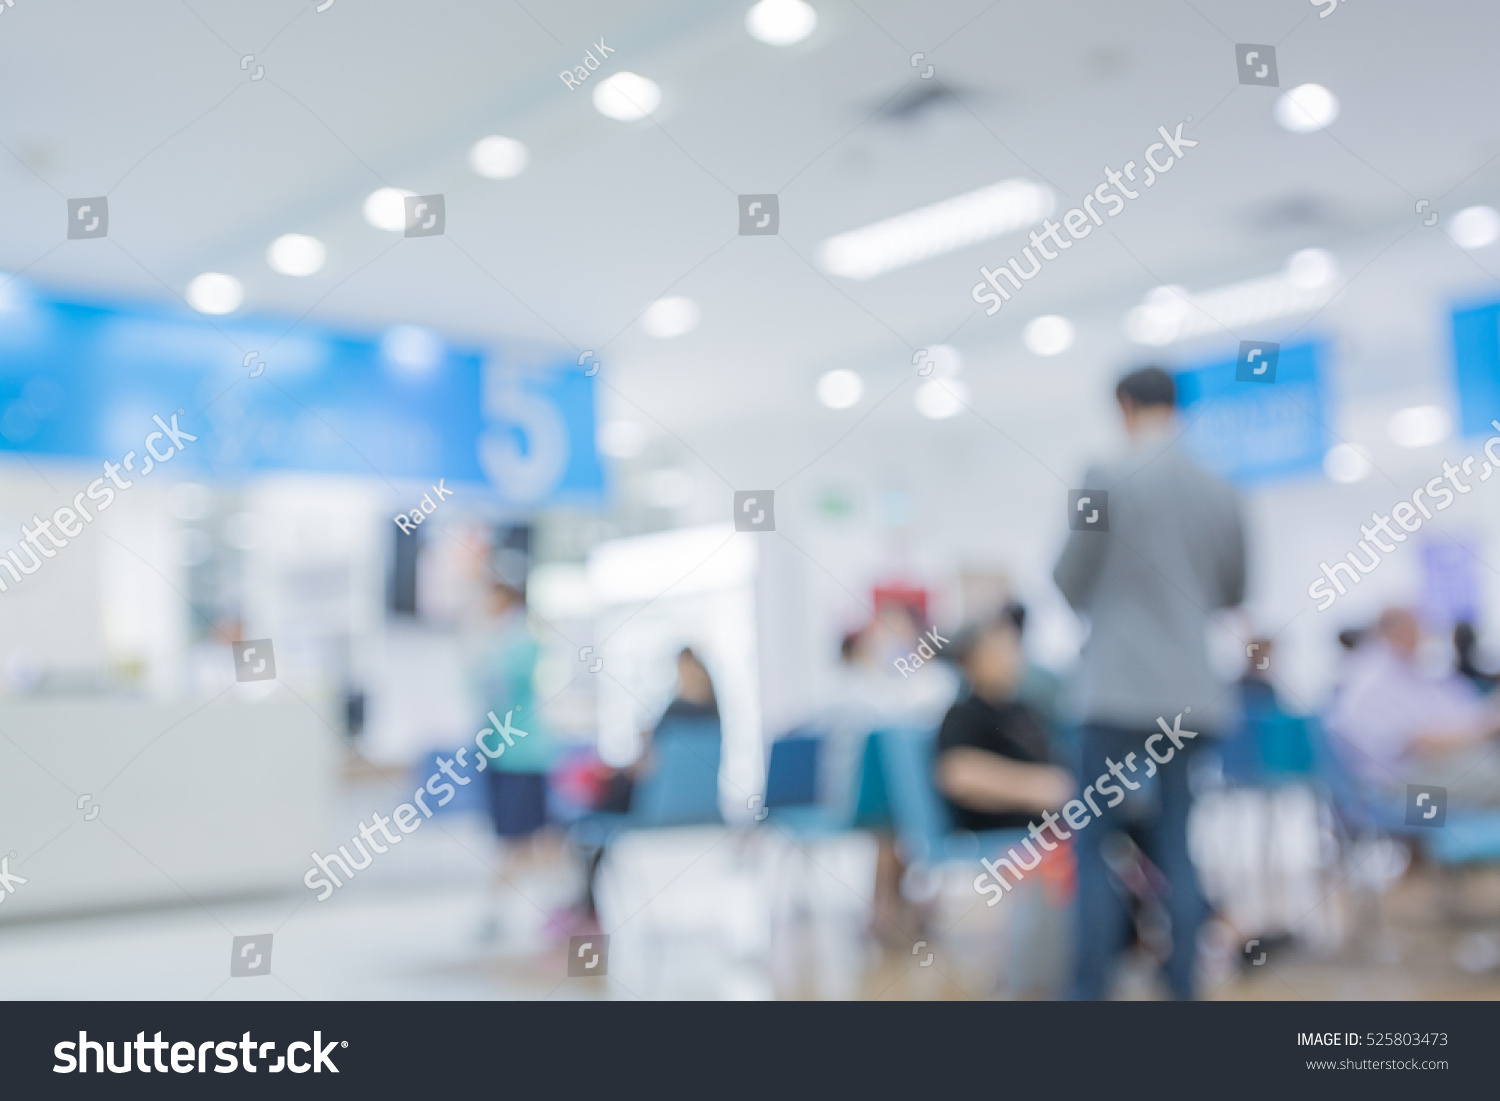 Blurred image of people waiting to see a doctor in hospital. For #525803473